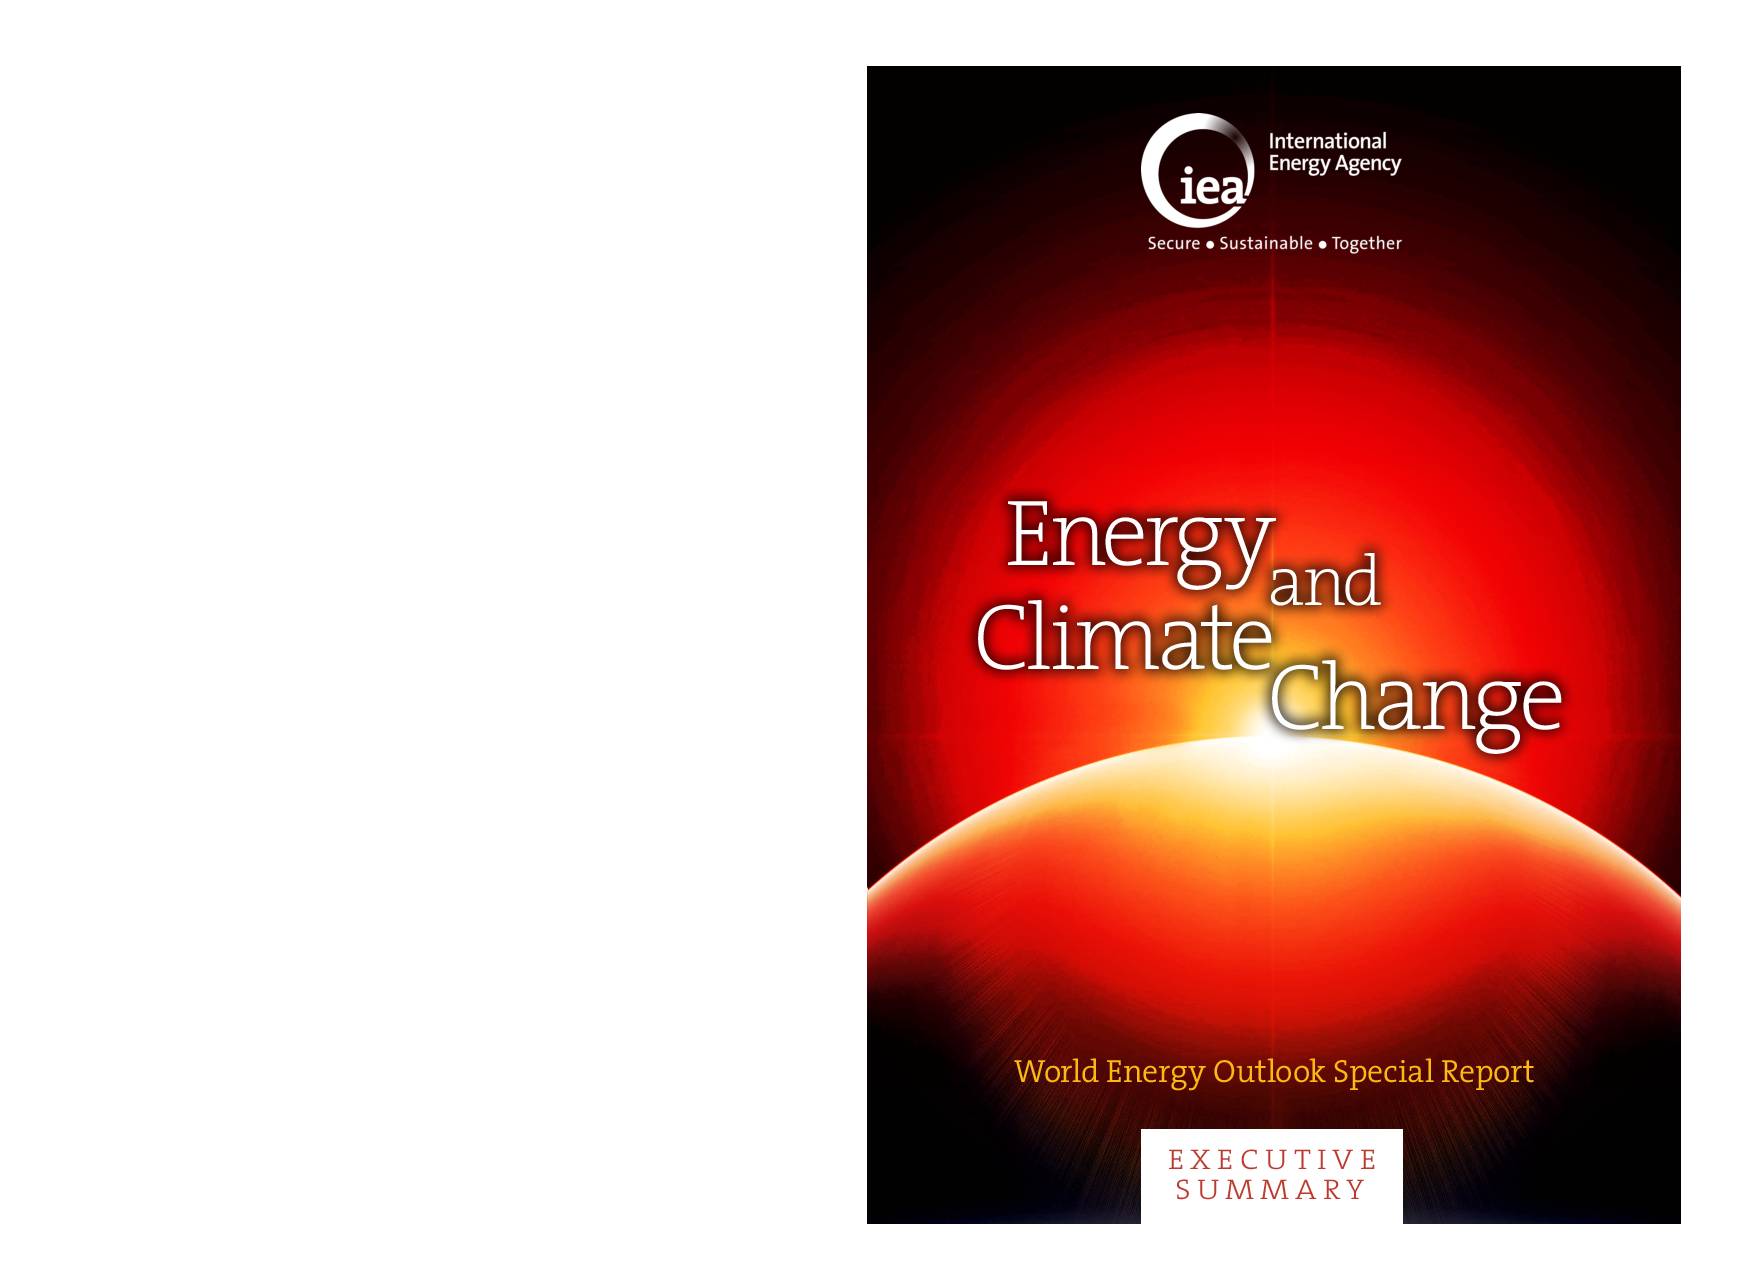 World Energy Outlook Special Report 2015: Energy and Climate Change – Executive Summary